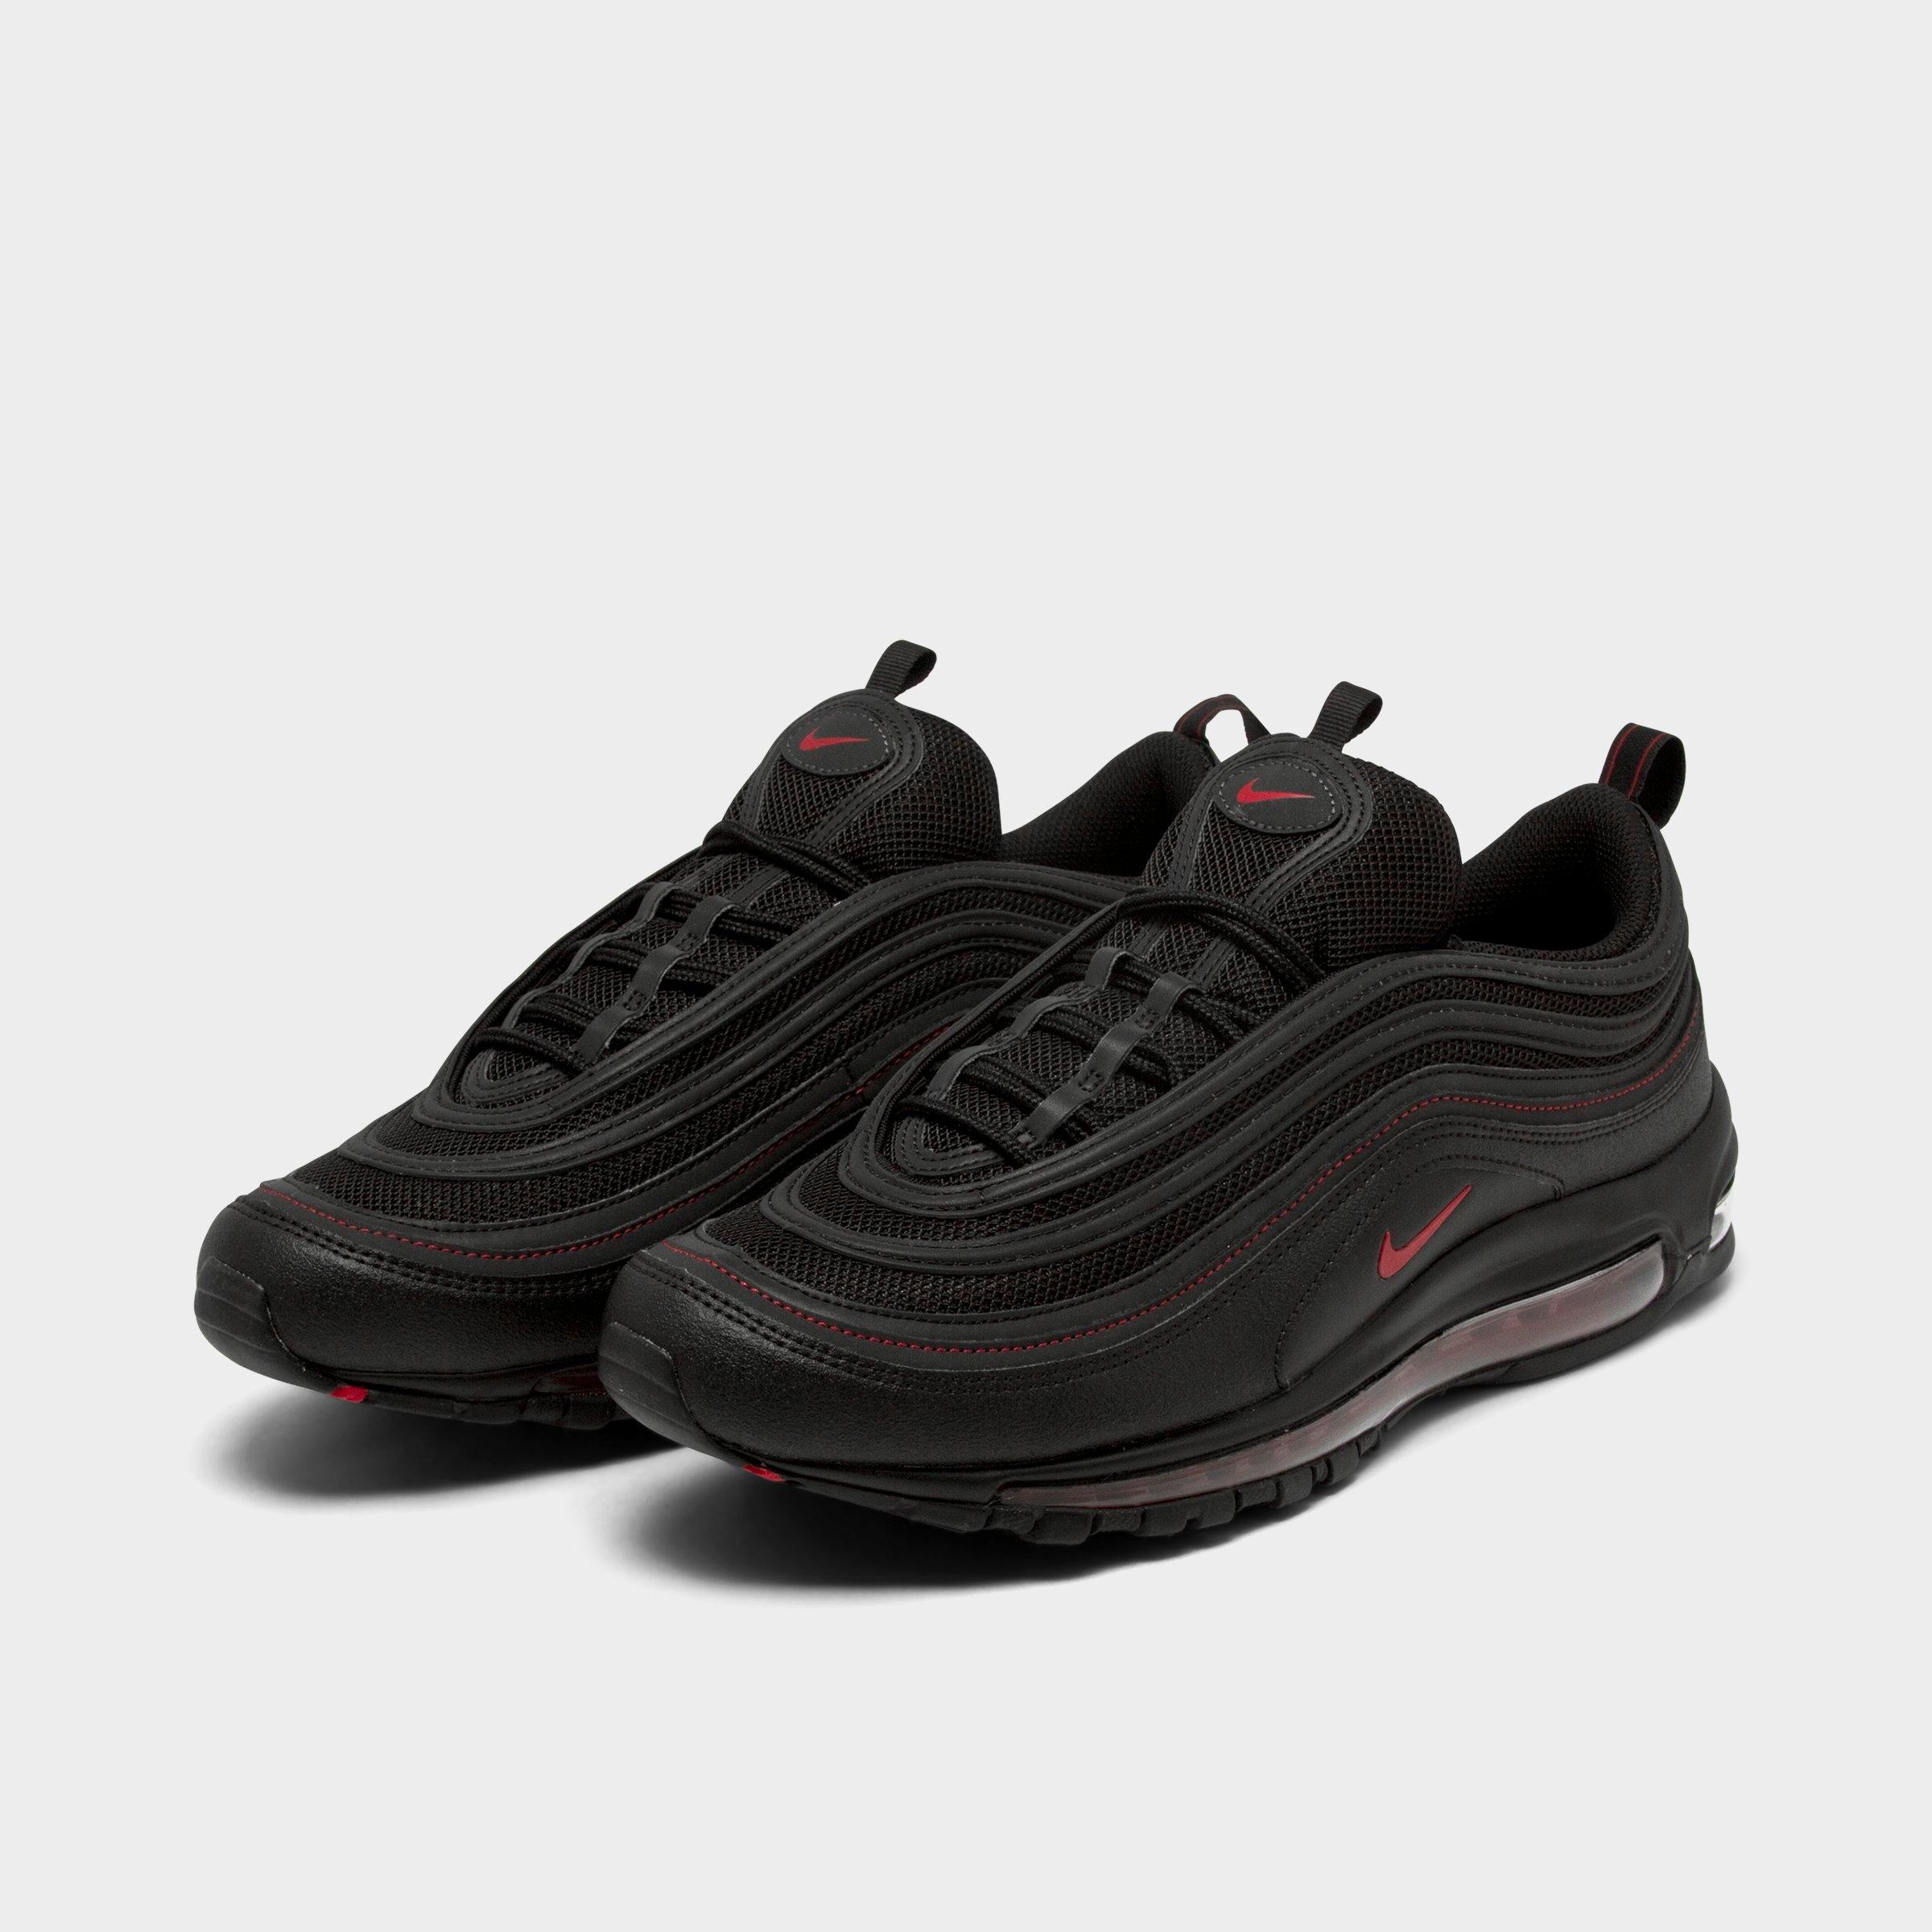 nike air max 97 red and black